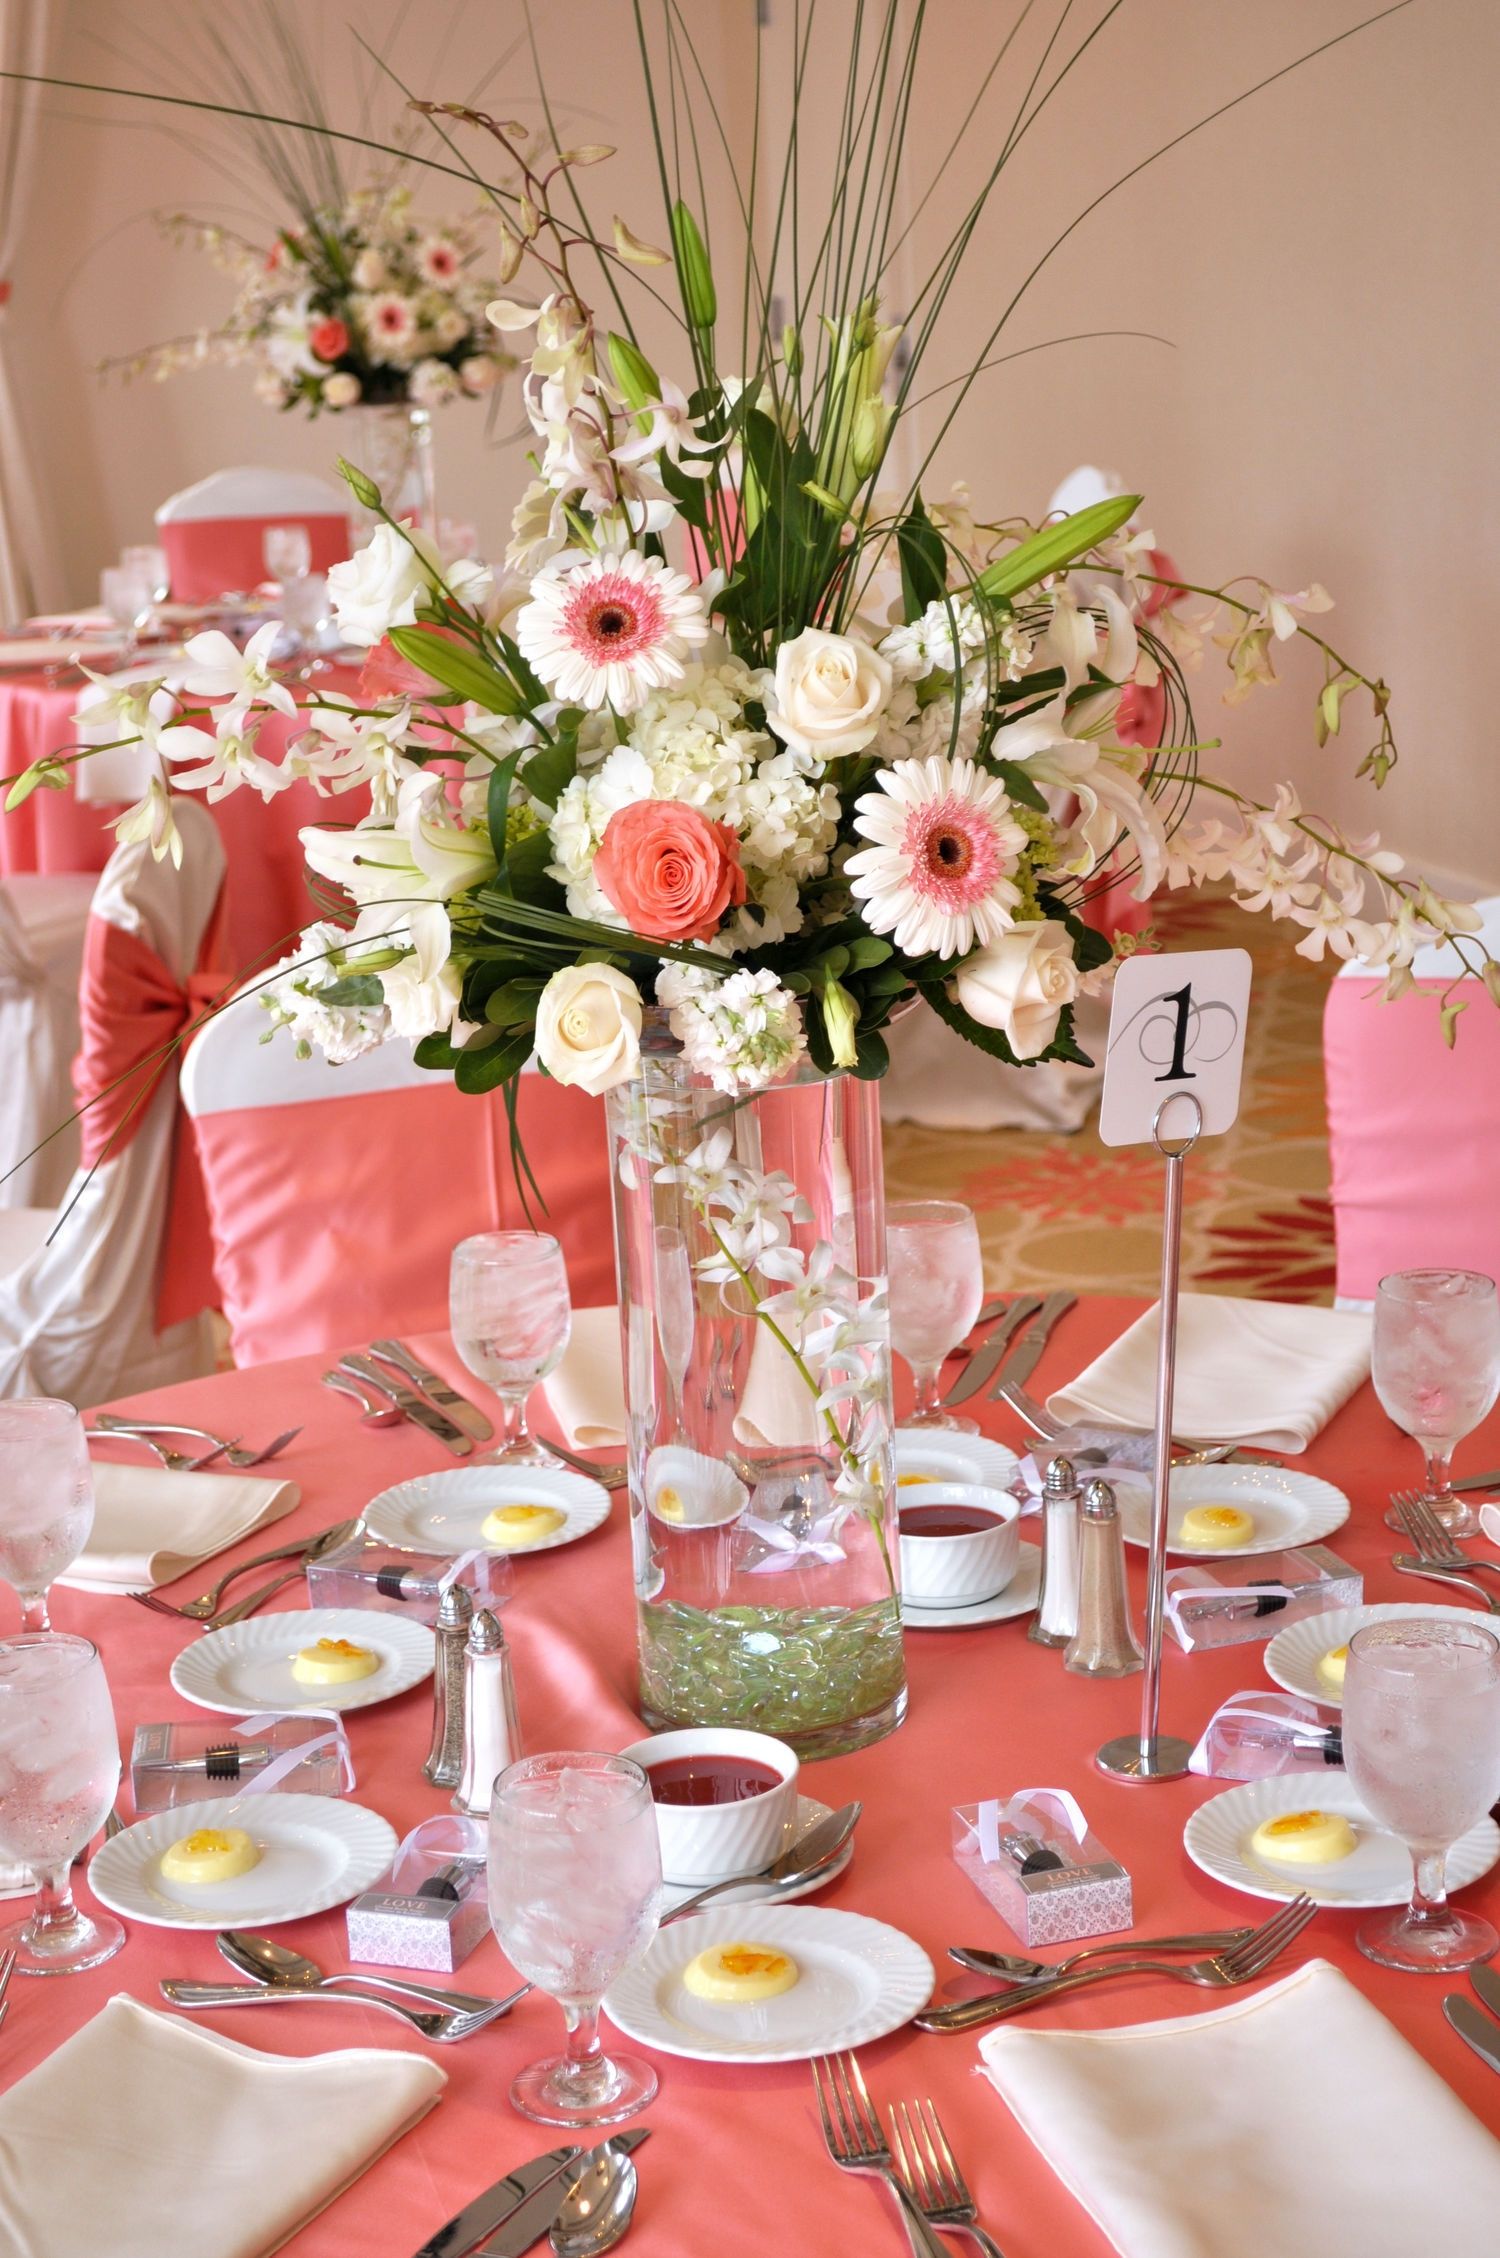 Impressive Unique How To Choose The Right Wedding Centerpieces For Round Table? Pertaining To Wedding Decoration Ideas Coral Wedding Decor Ideas With Flowers (View 16 of 38)